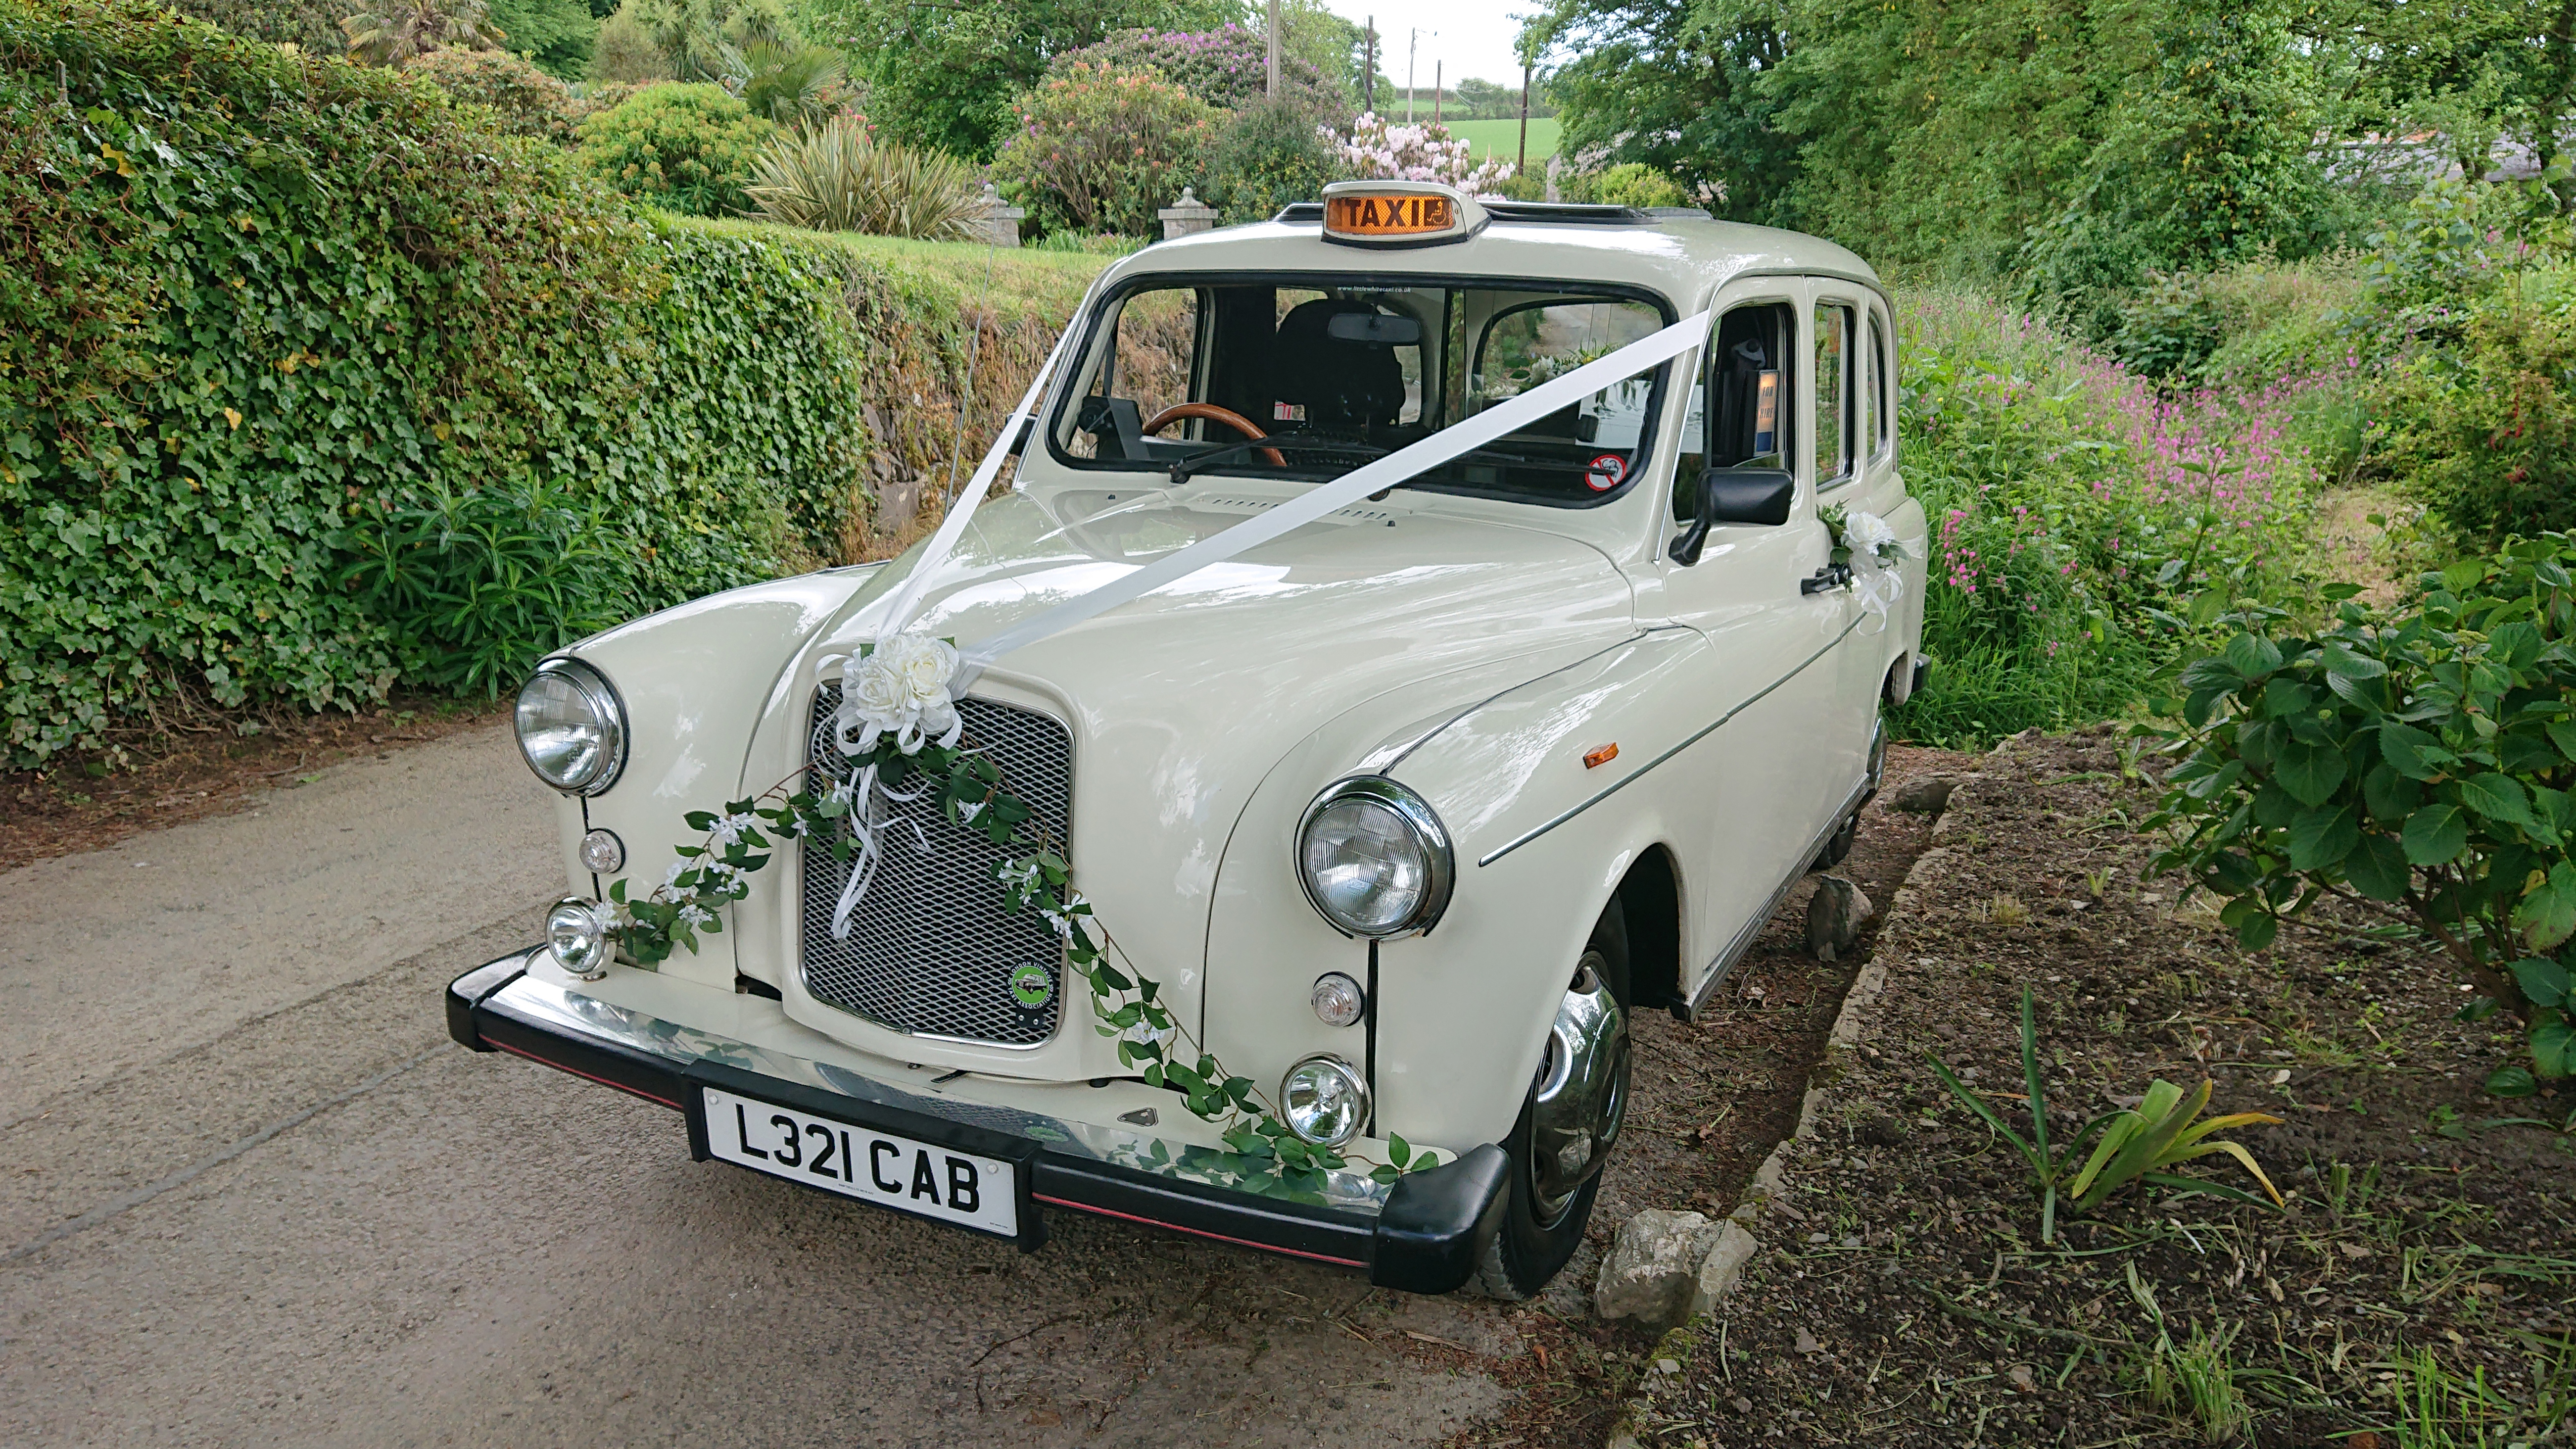 Classic Taxi Cab decorated with wedding ribbons across its bonnet and floral arrangement in the Cornish country side